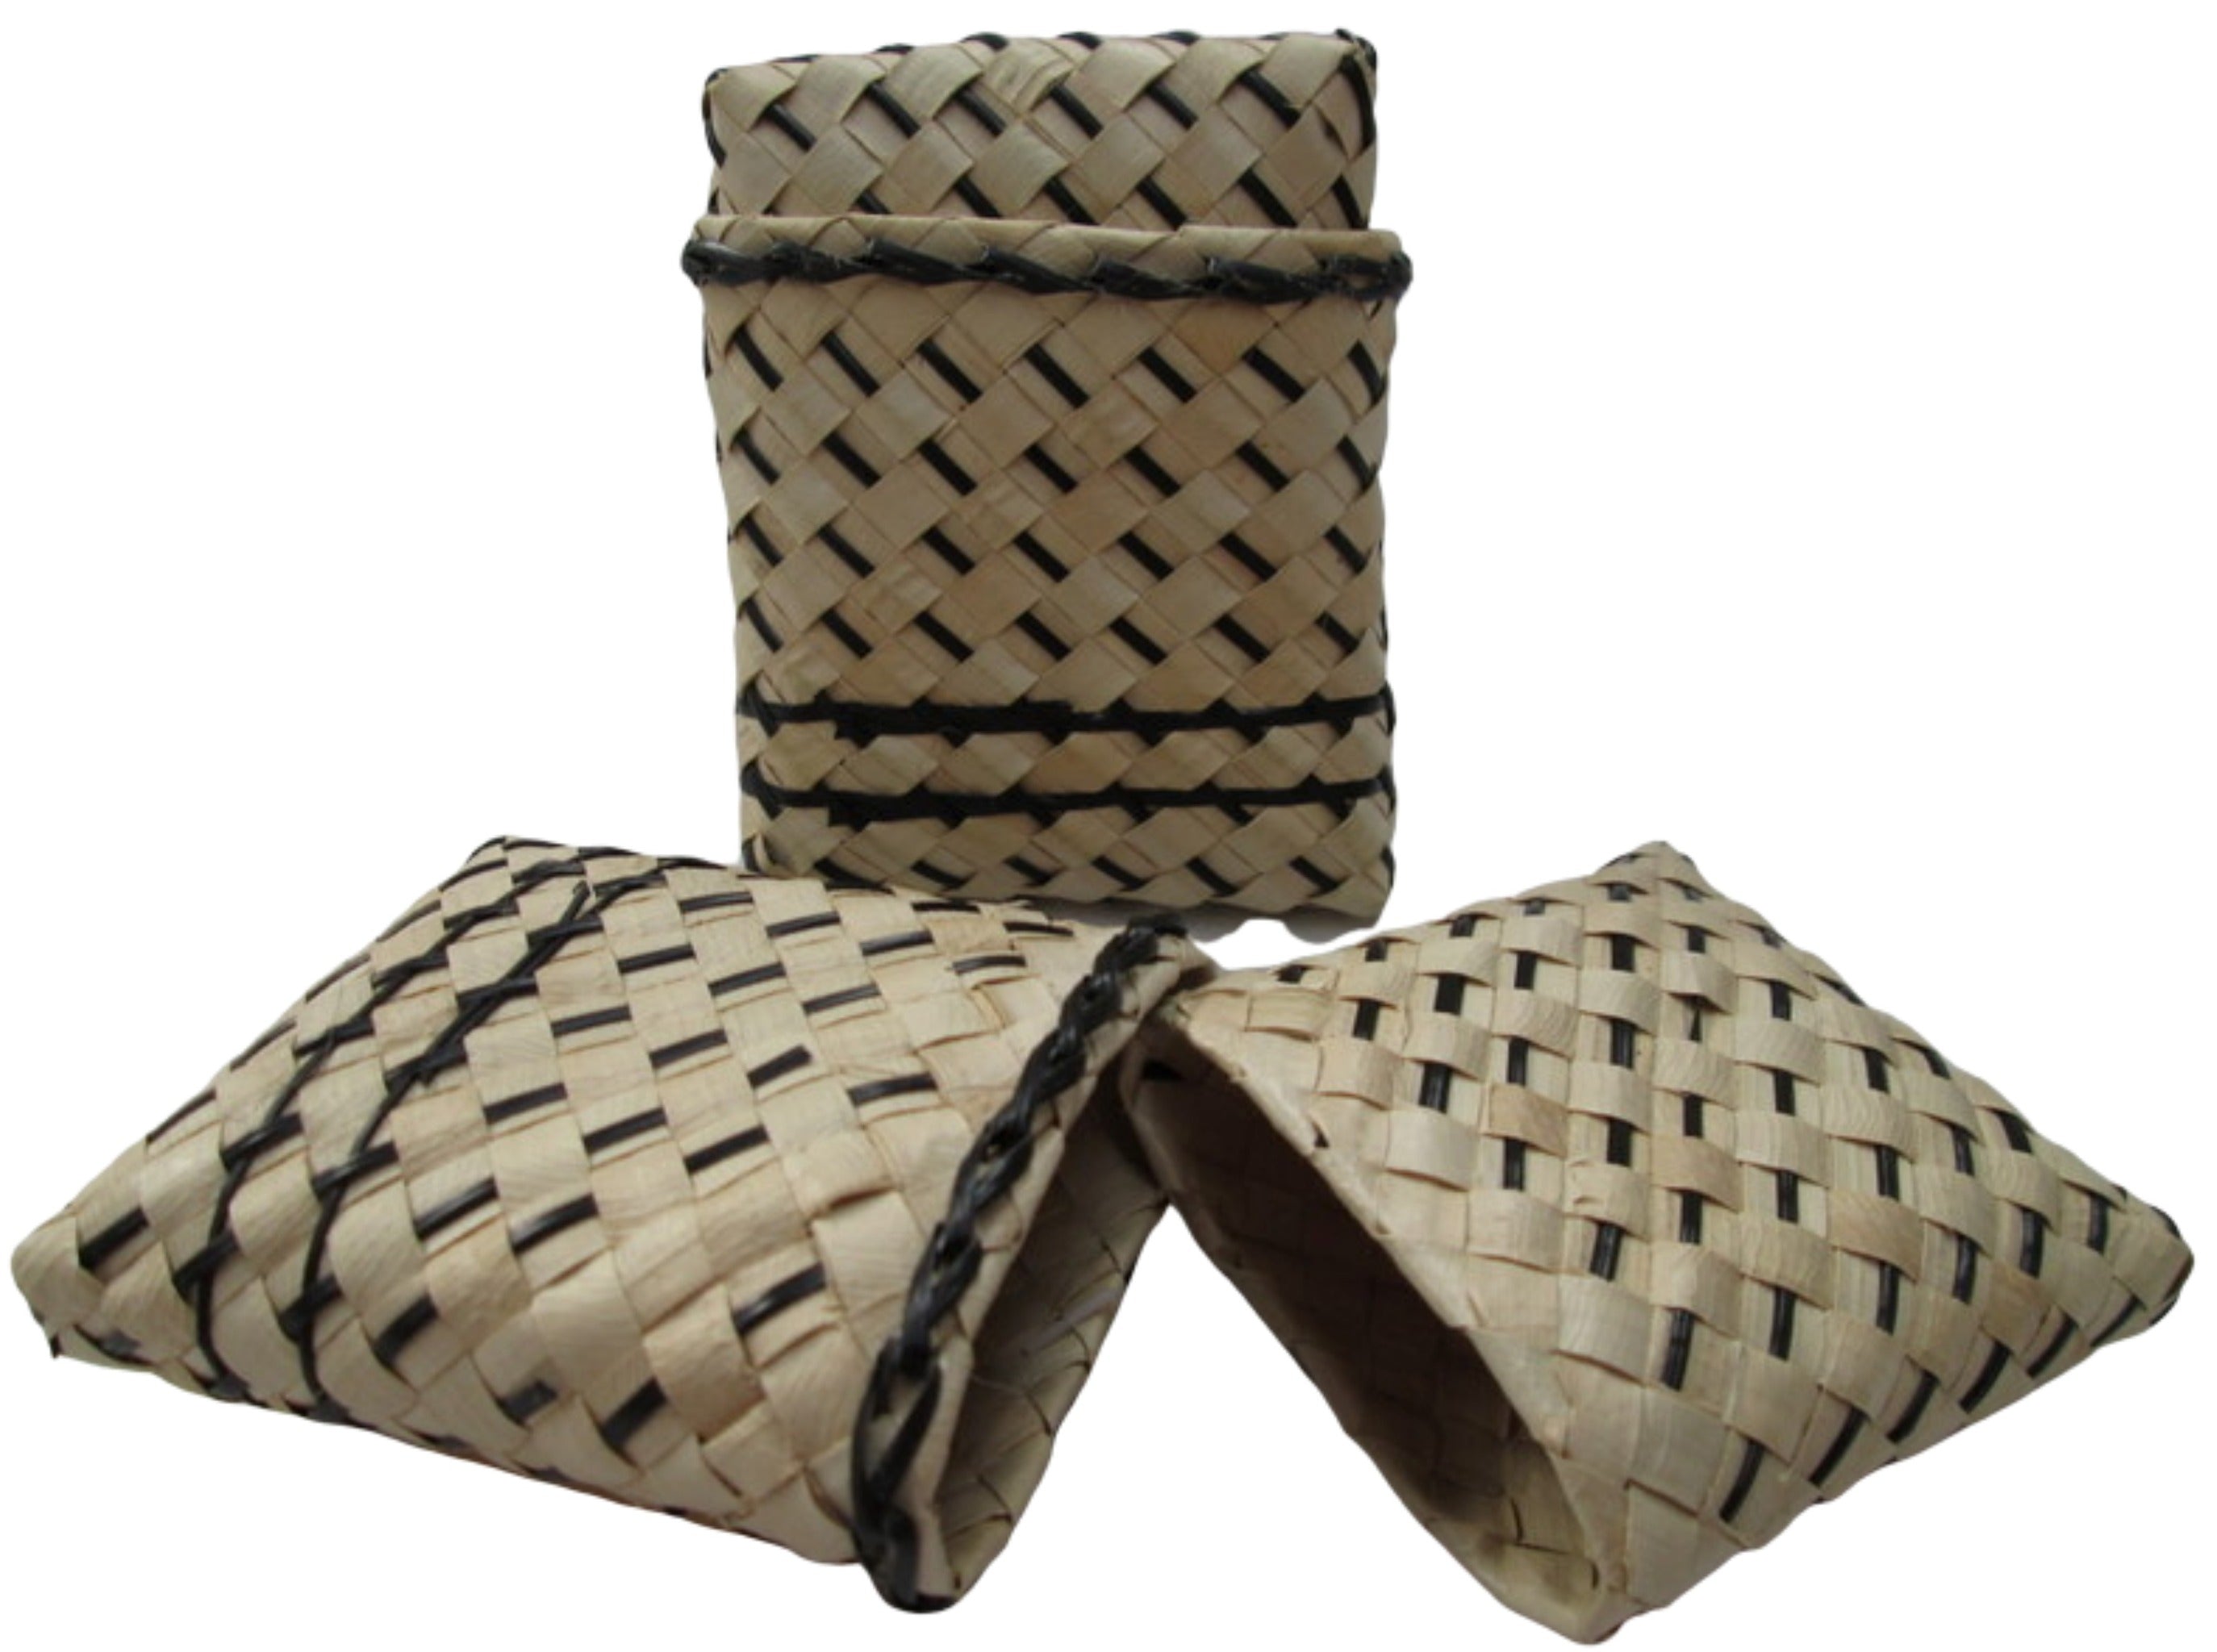 Kete Pouch